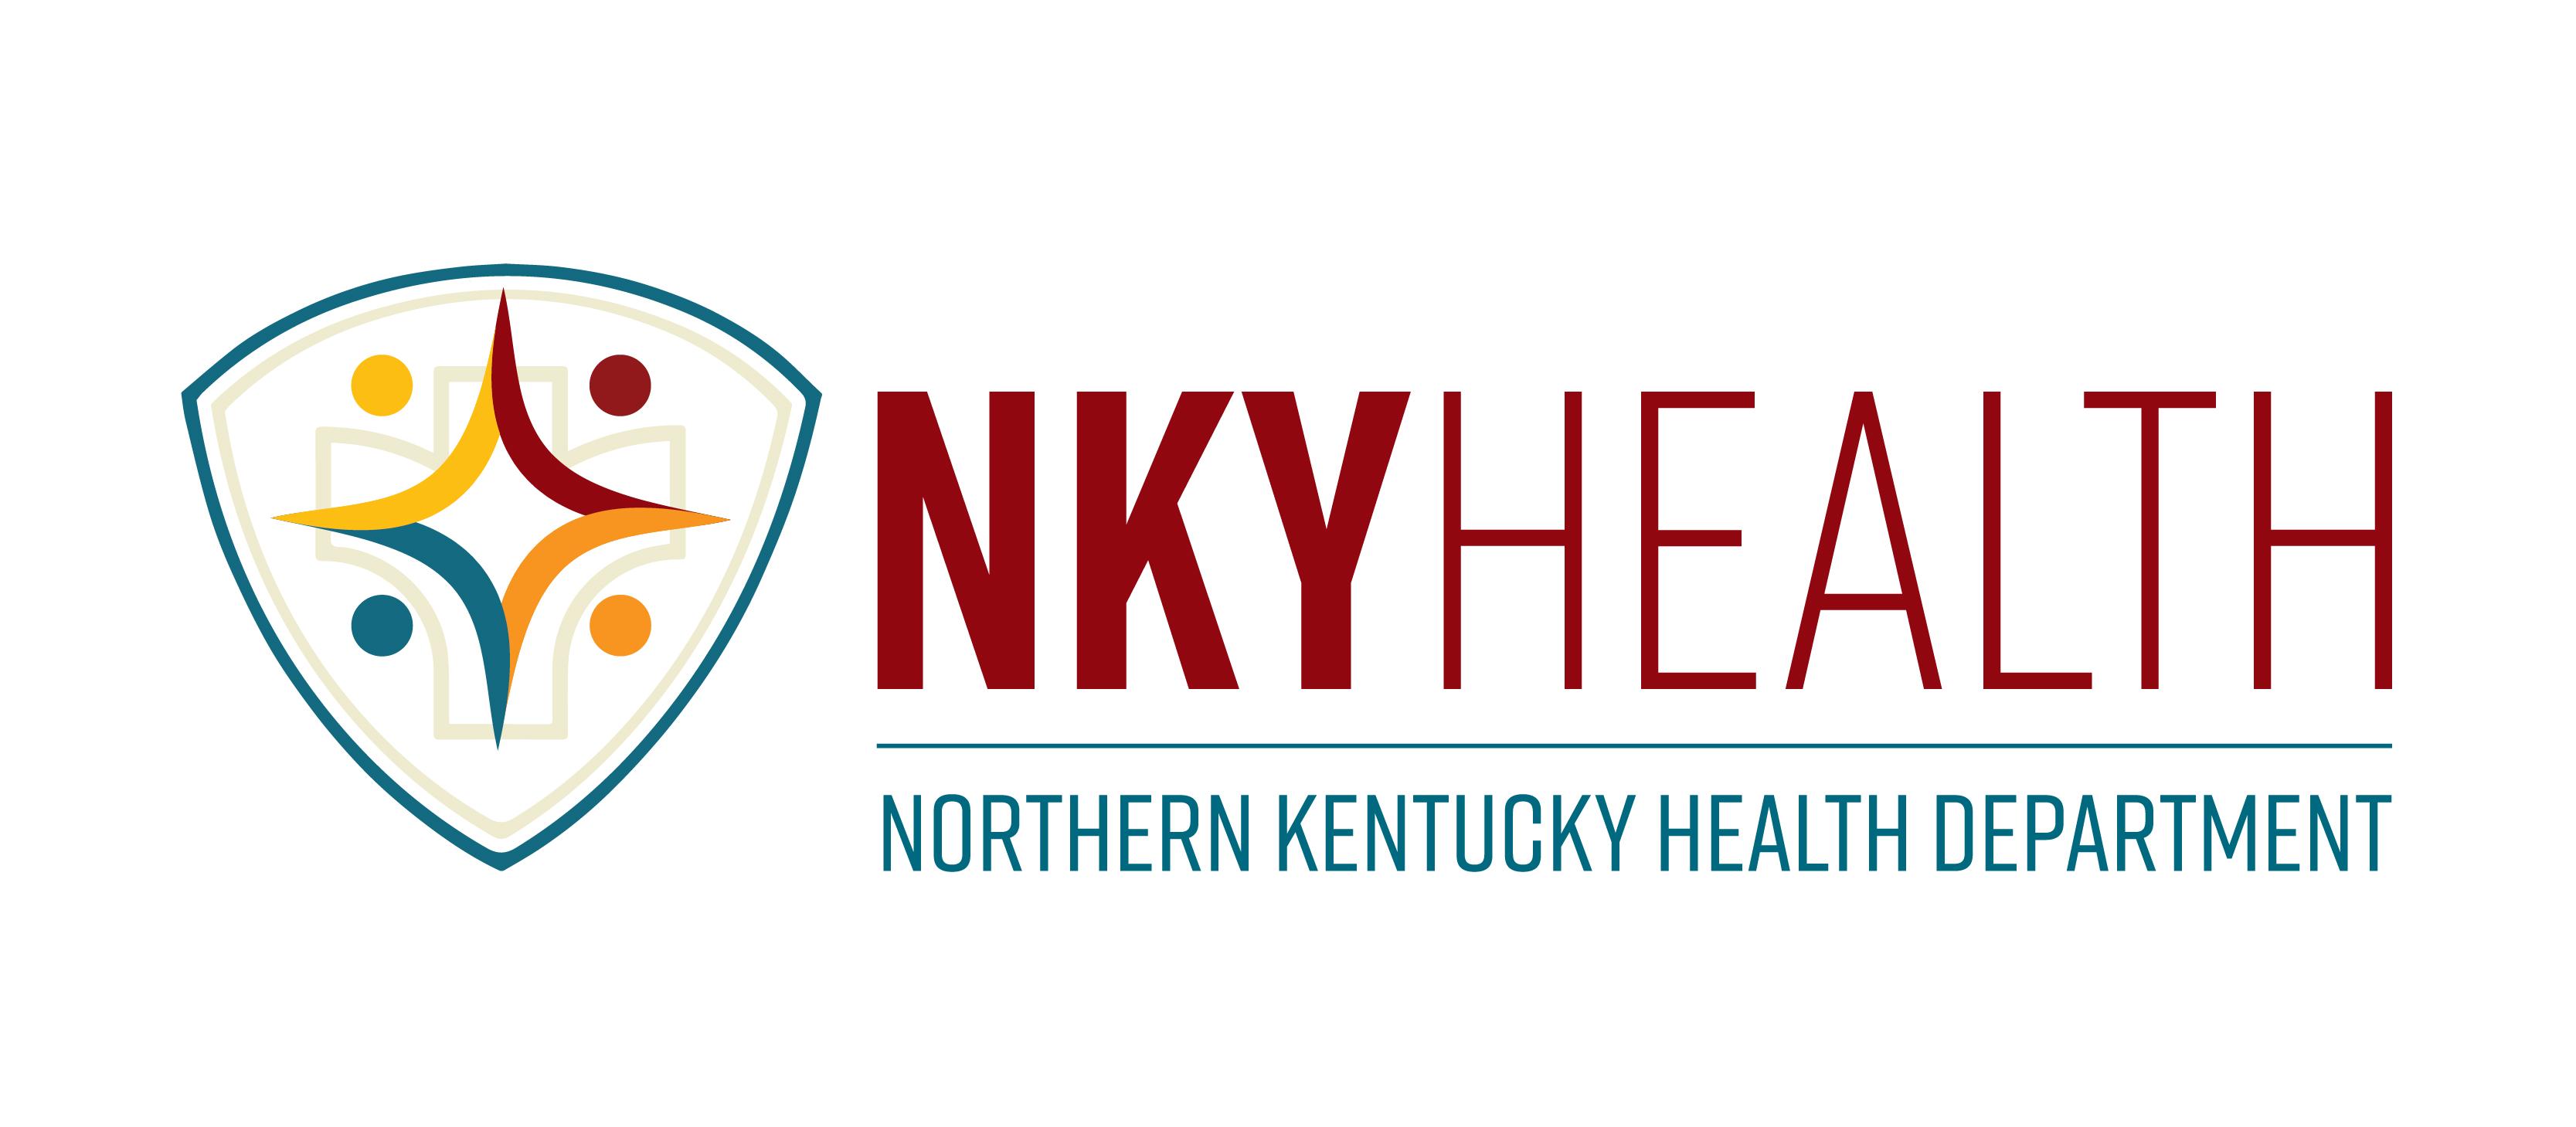 NKY Health April 13, 2020 Food Manager Certification Class - AM Class